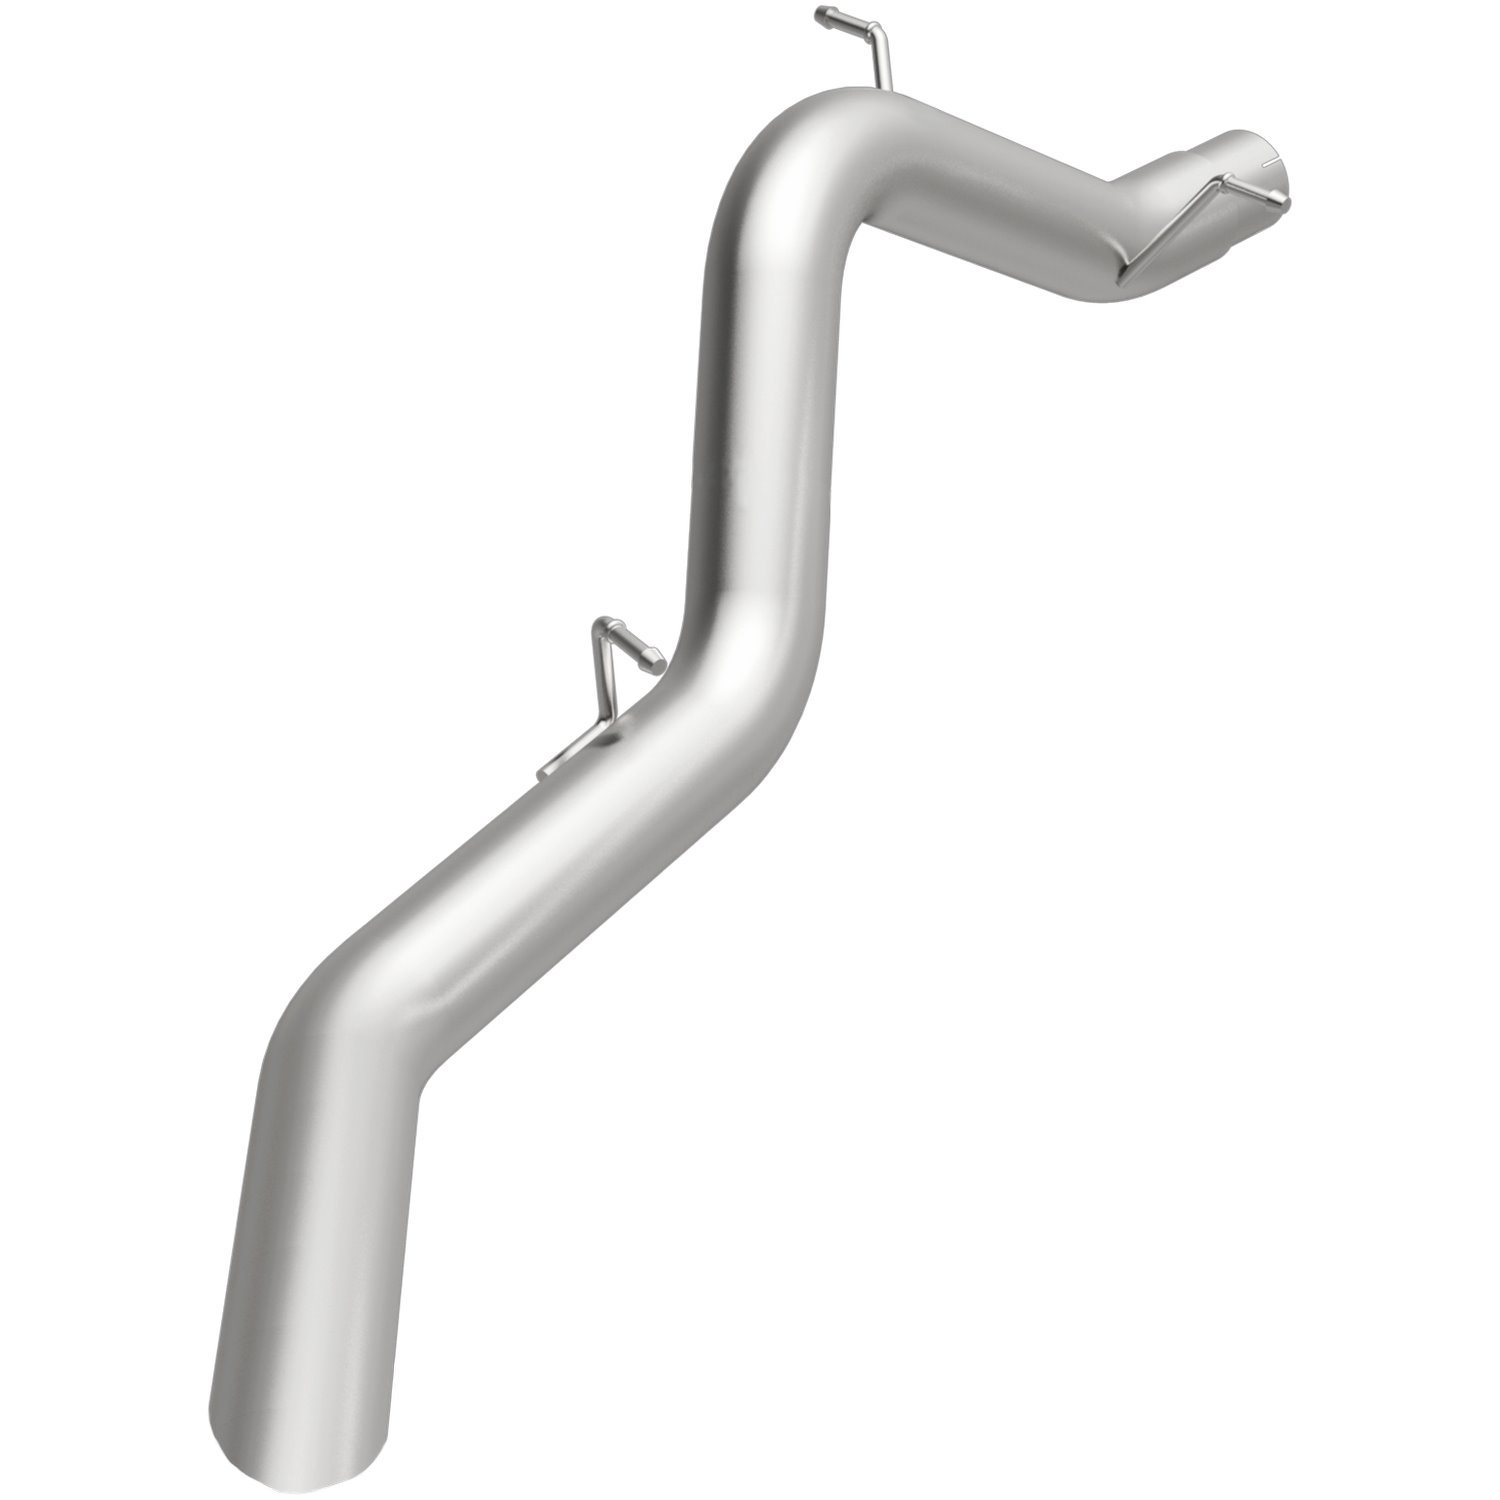 Direct-Fit Exhaust Tail Pipe, 2009-2013 GM Silverado/Sierra 1500